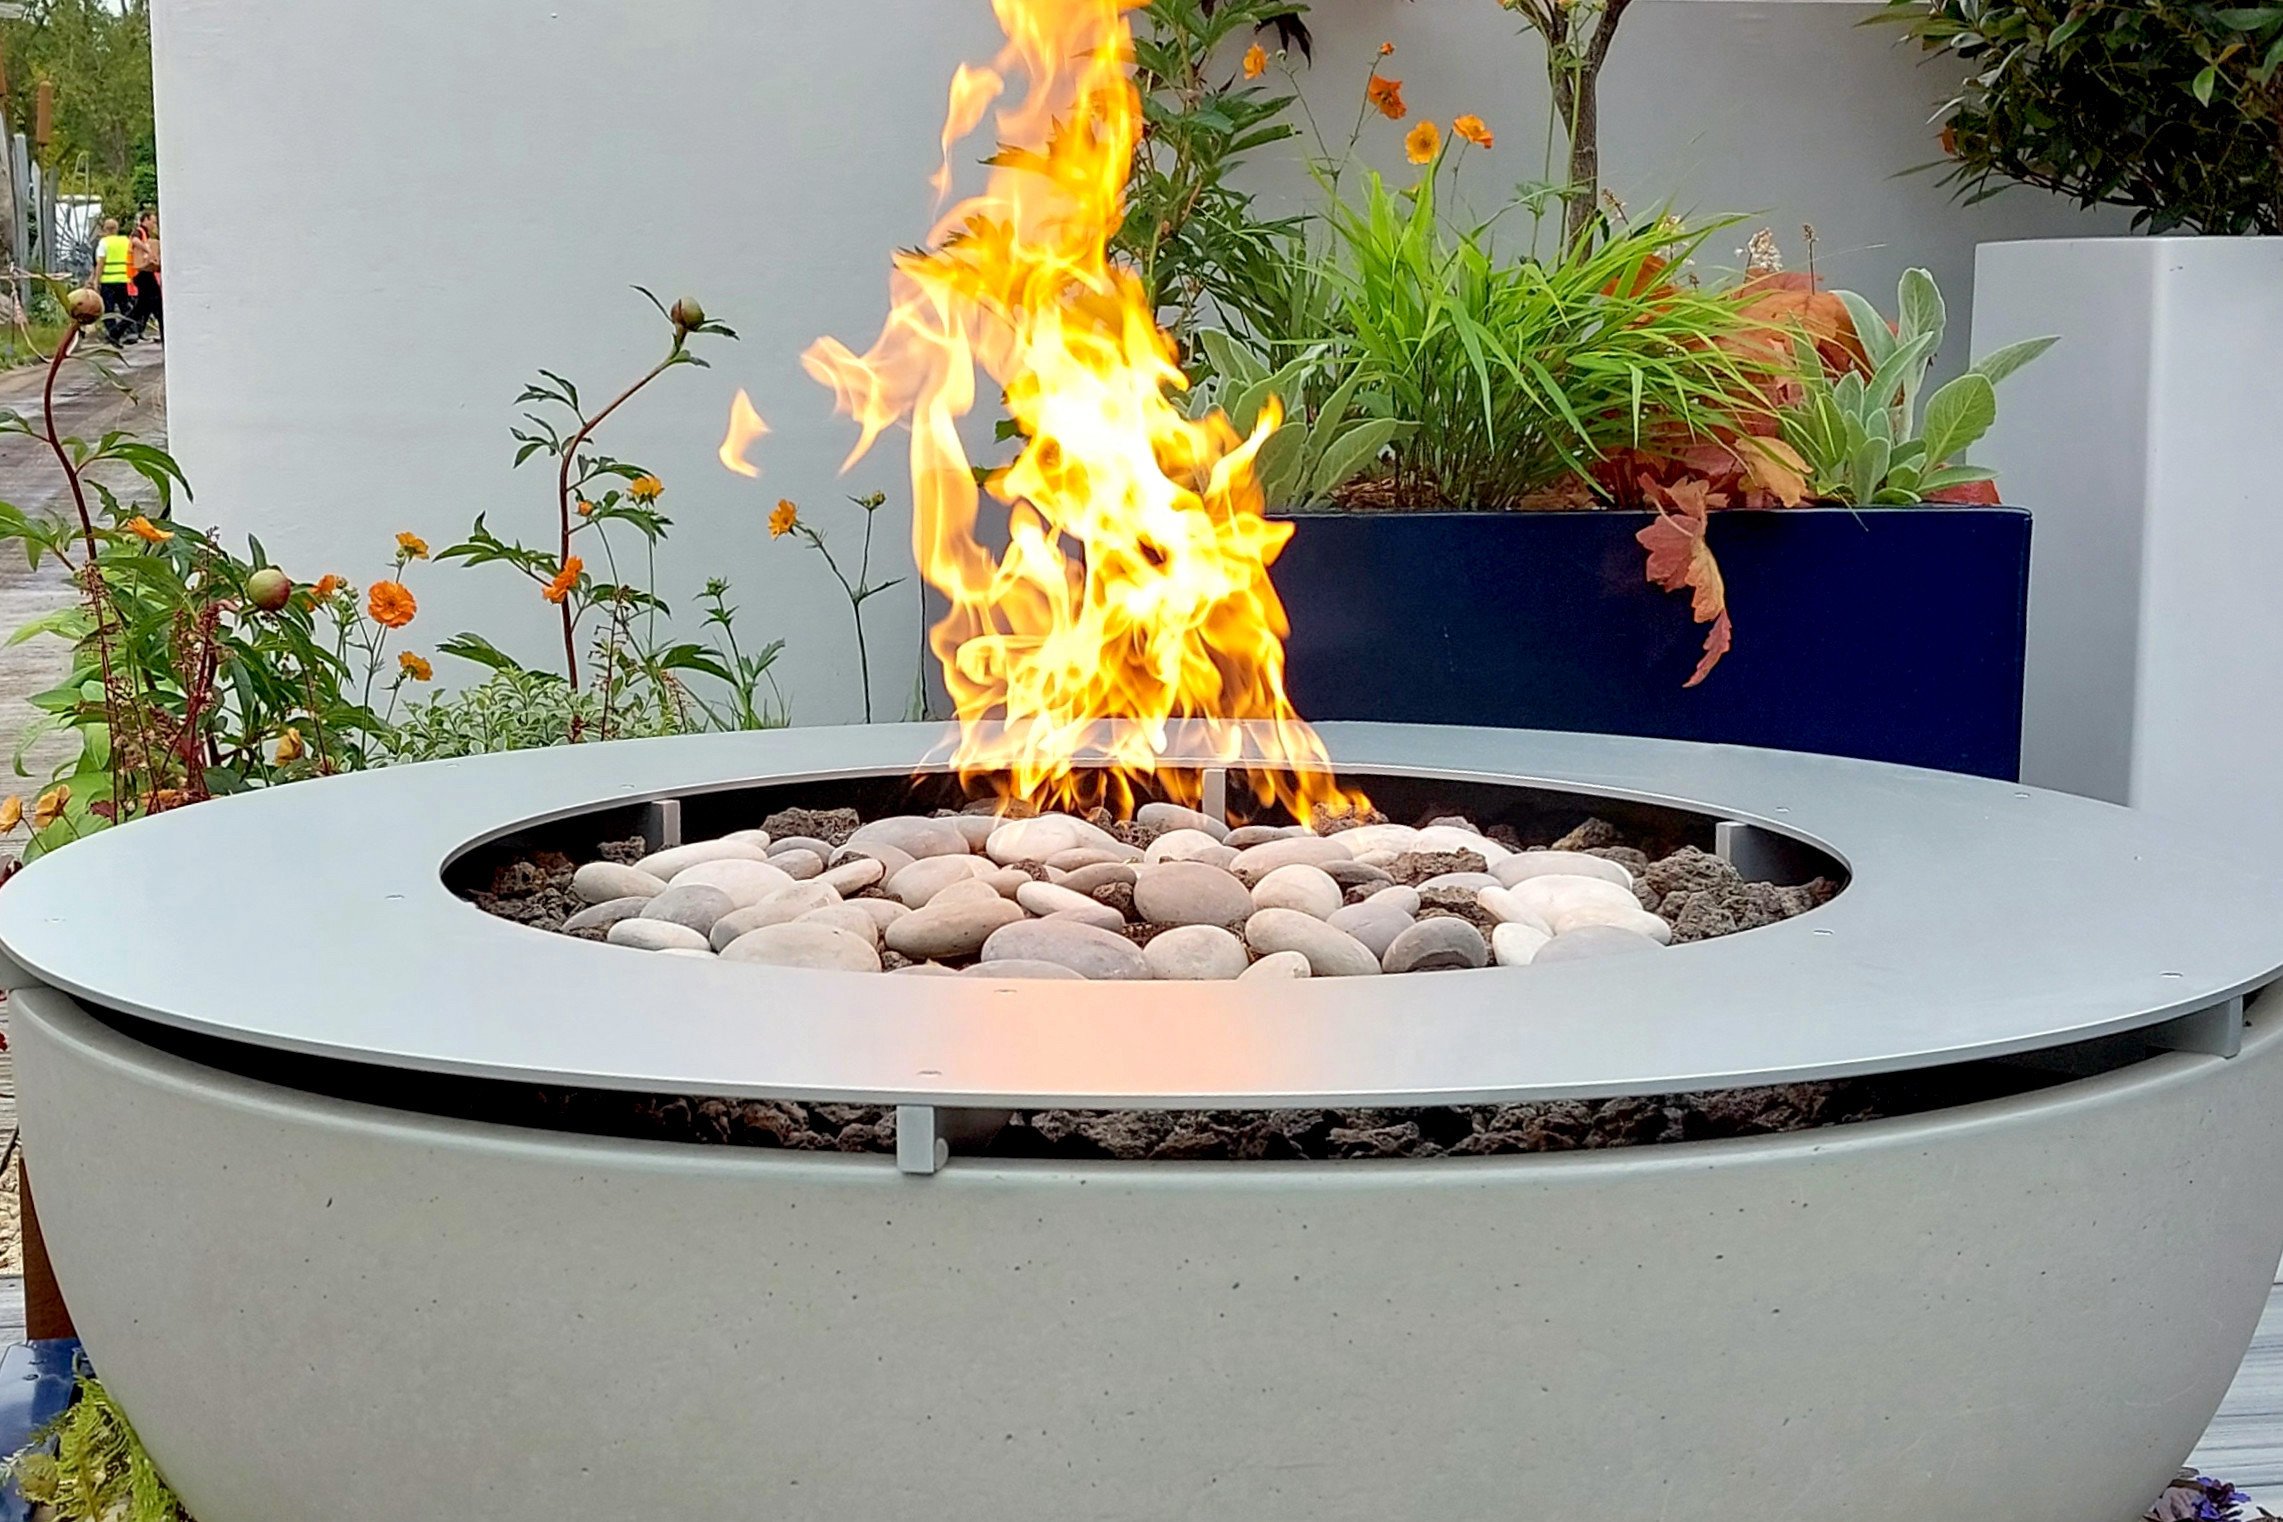 Are fire pits legal in San Diego, California?